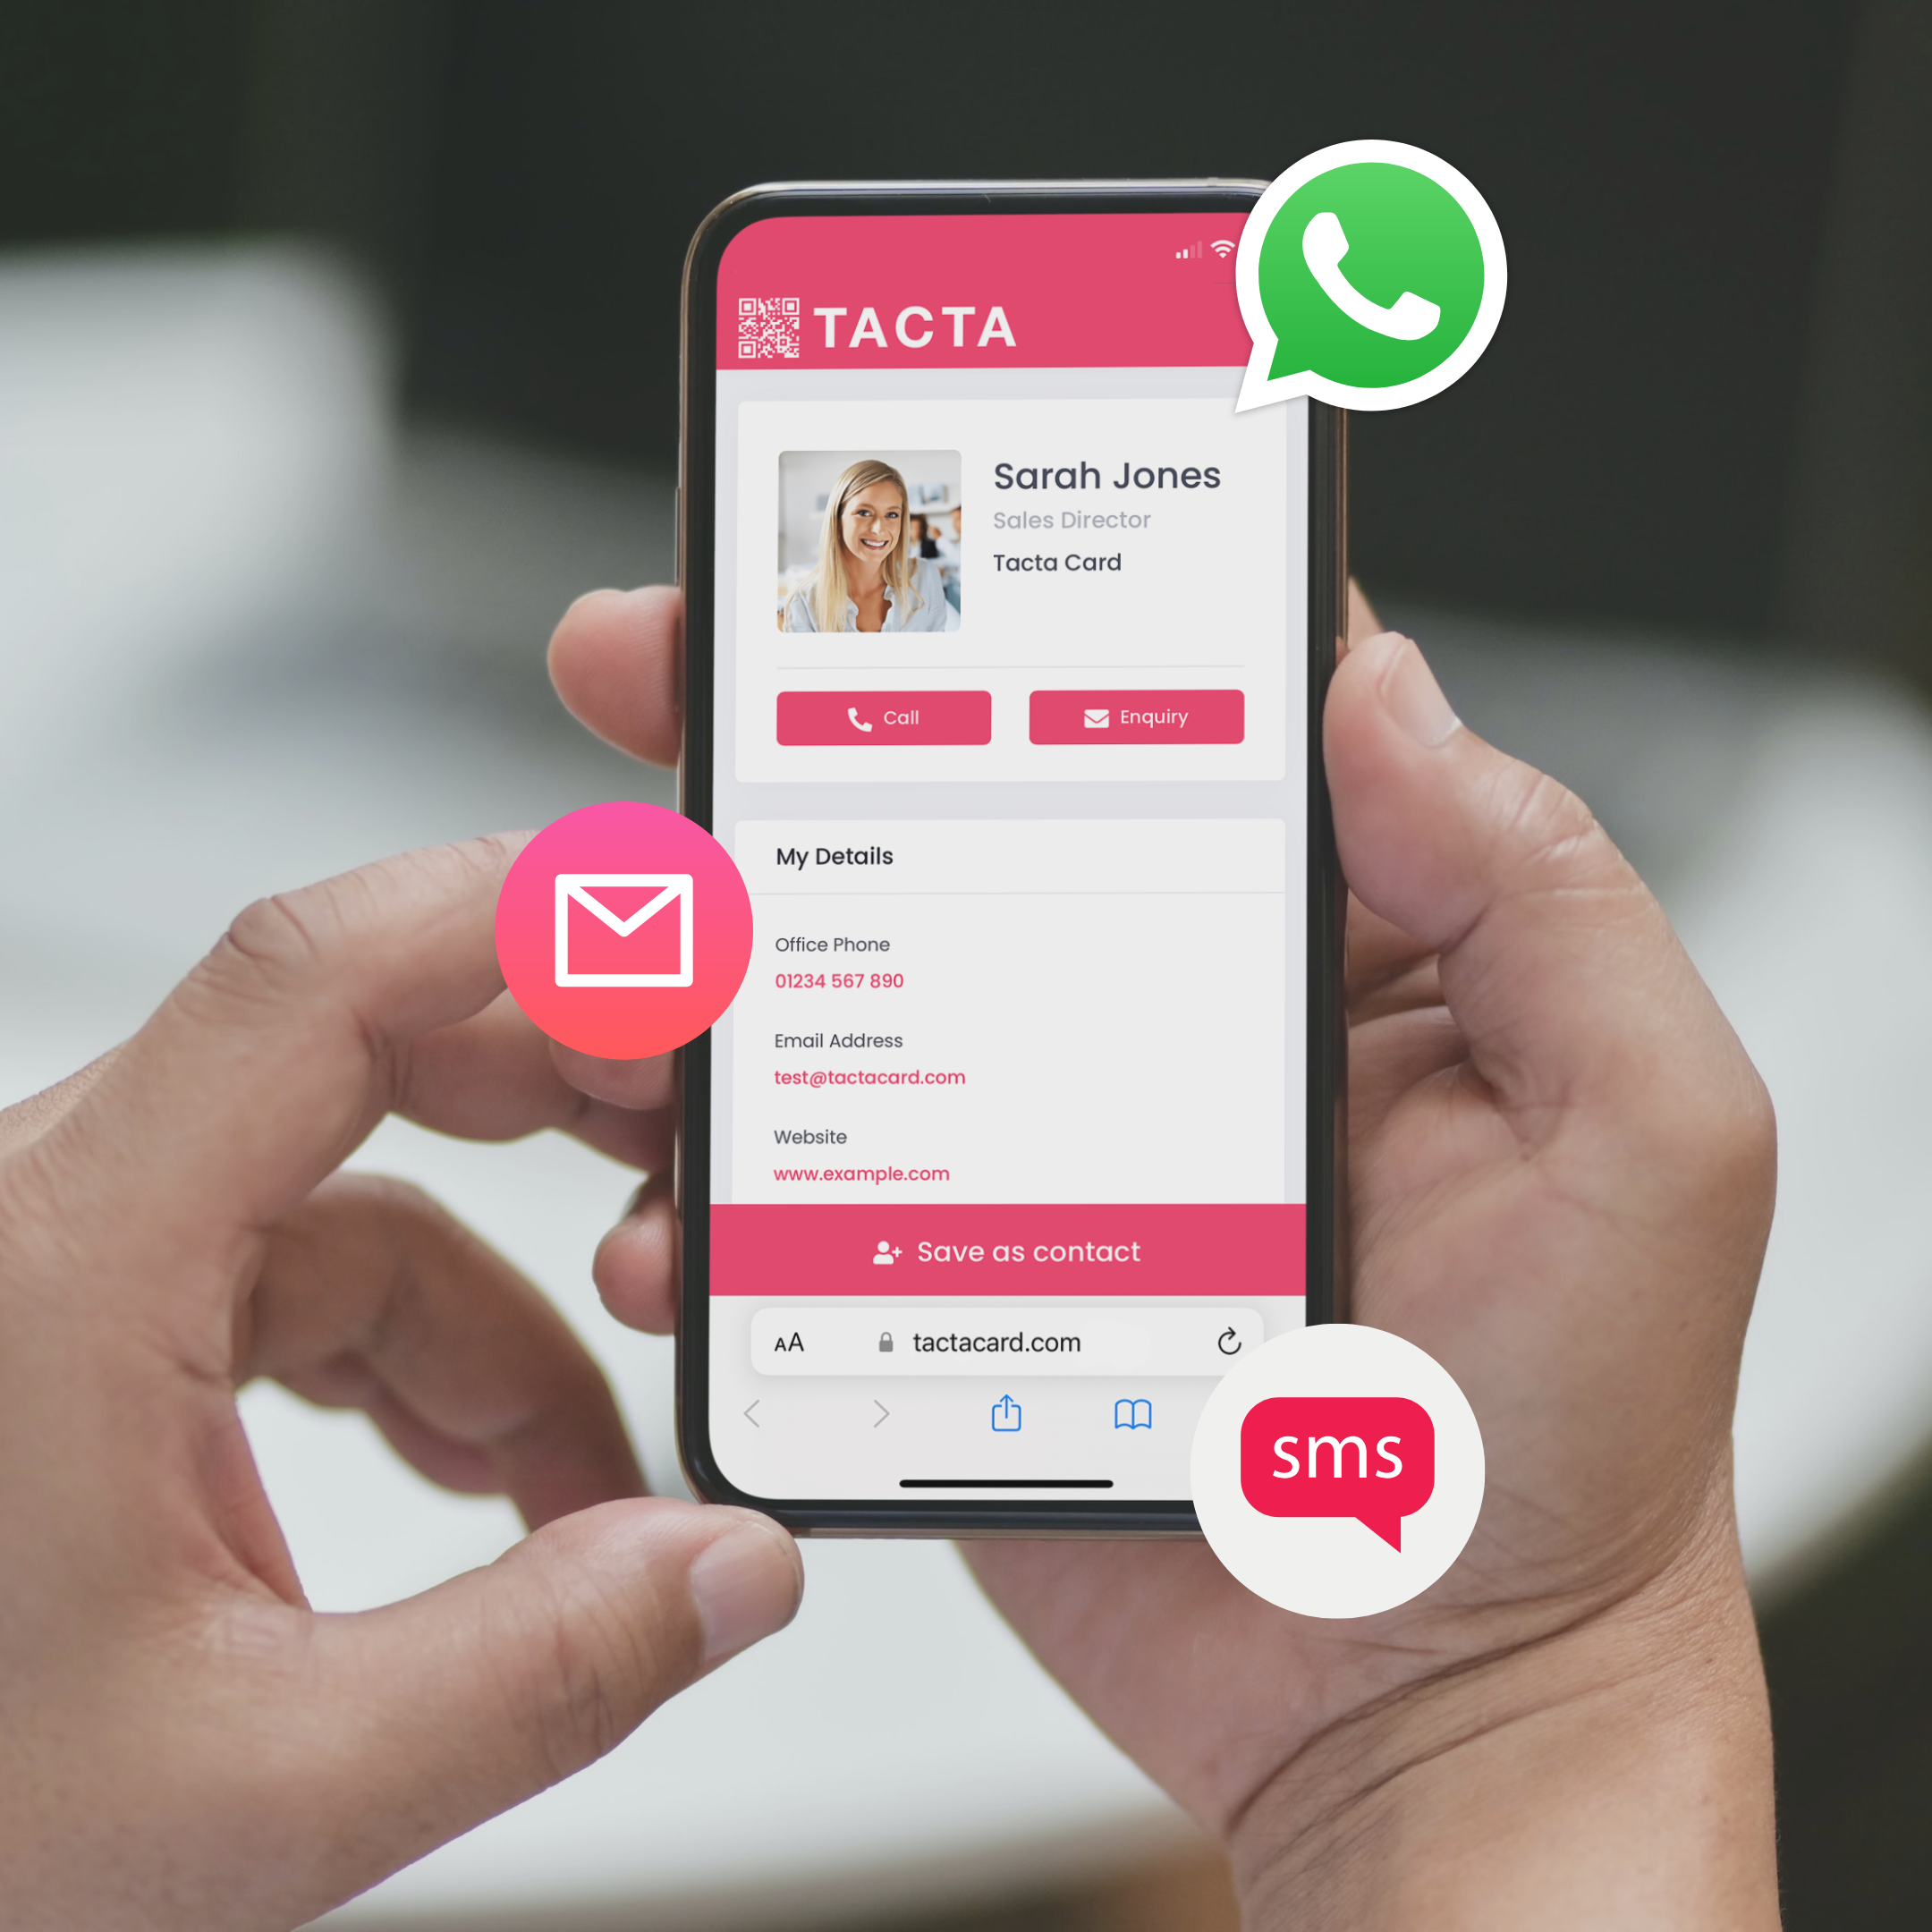 other ways to share your details with tacta card